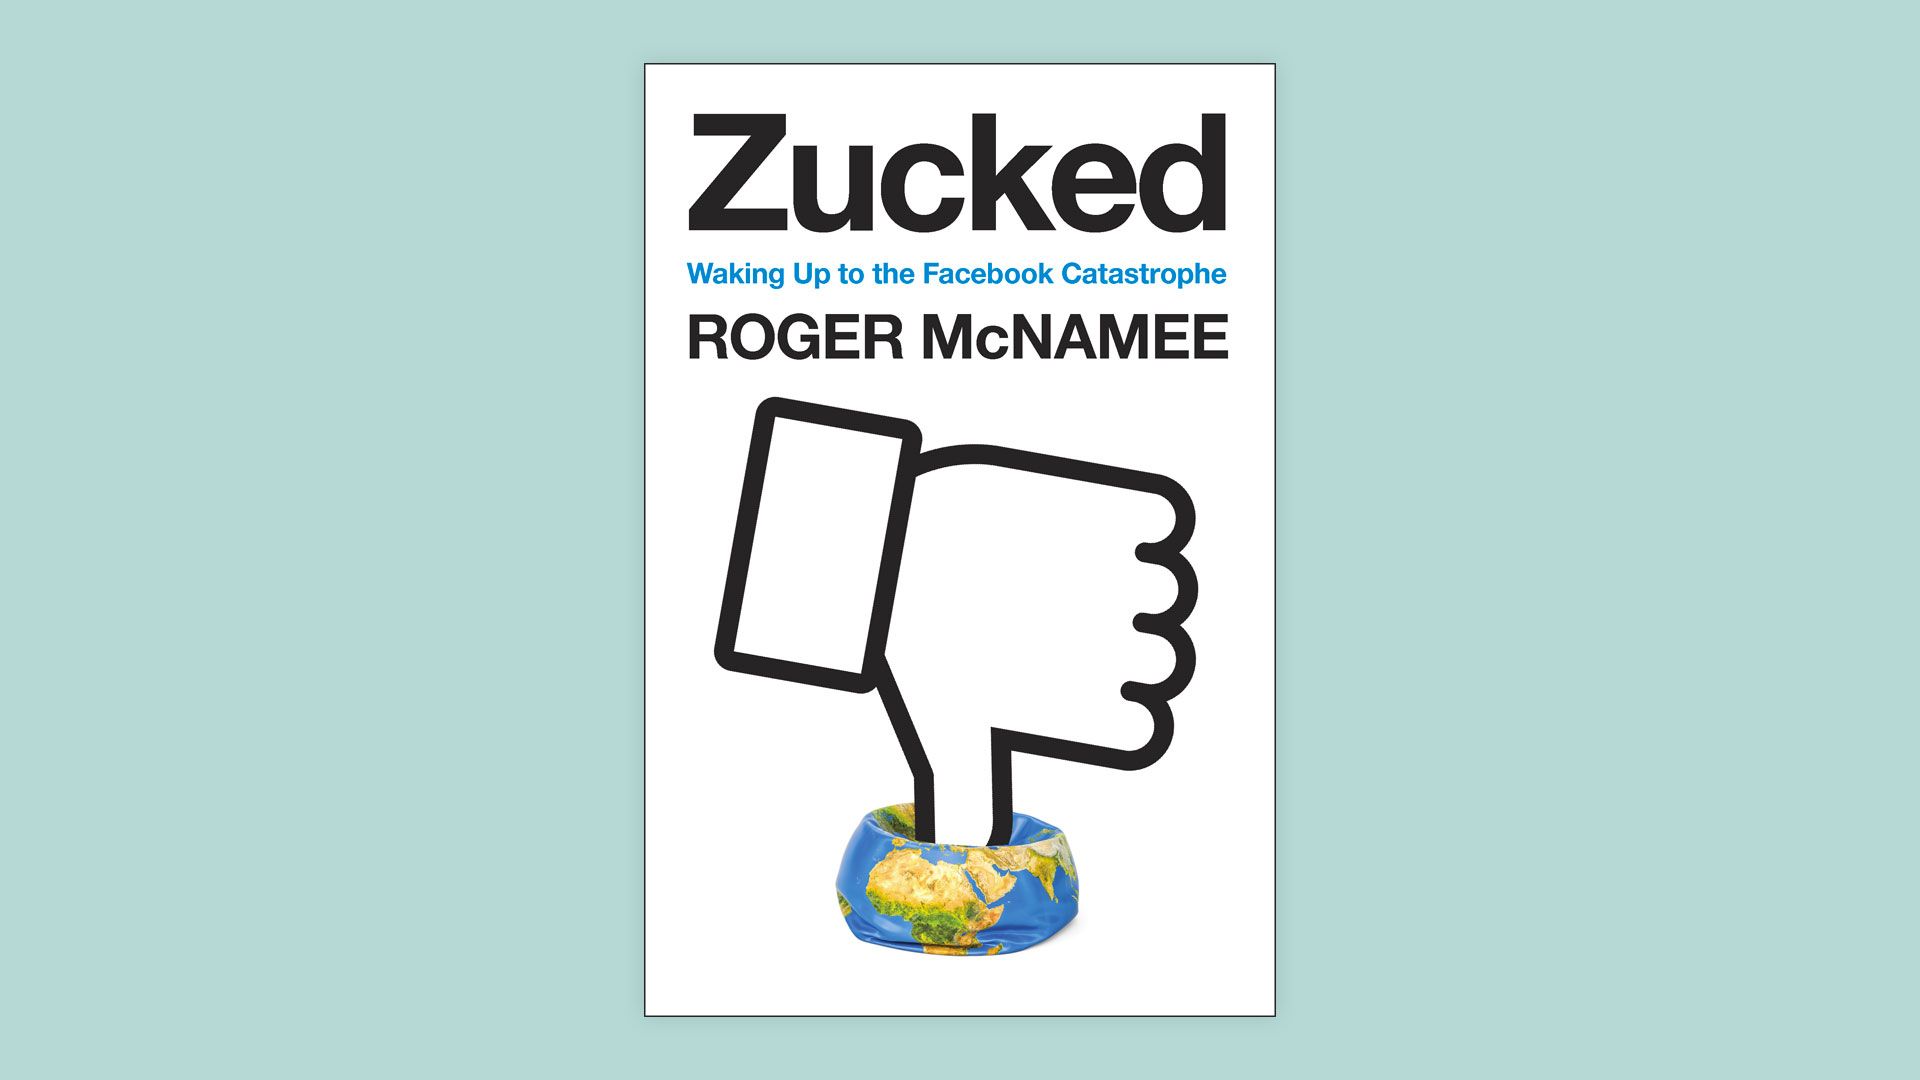 Book cover of Roger McNamee's "Zucked" showing a thumbs' down icon squashing a globe